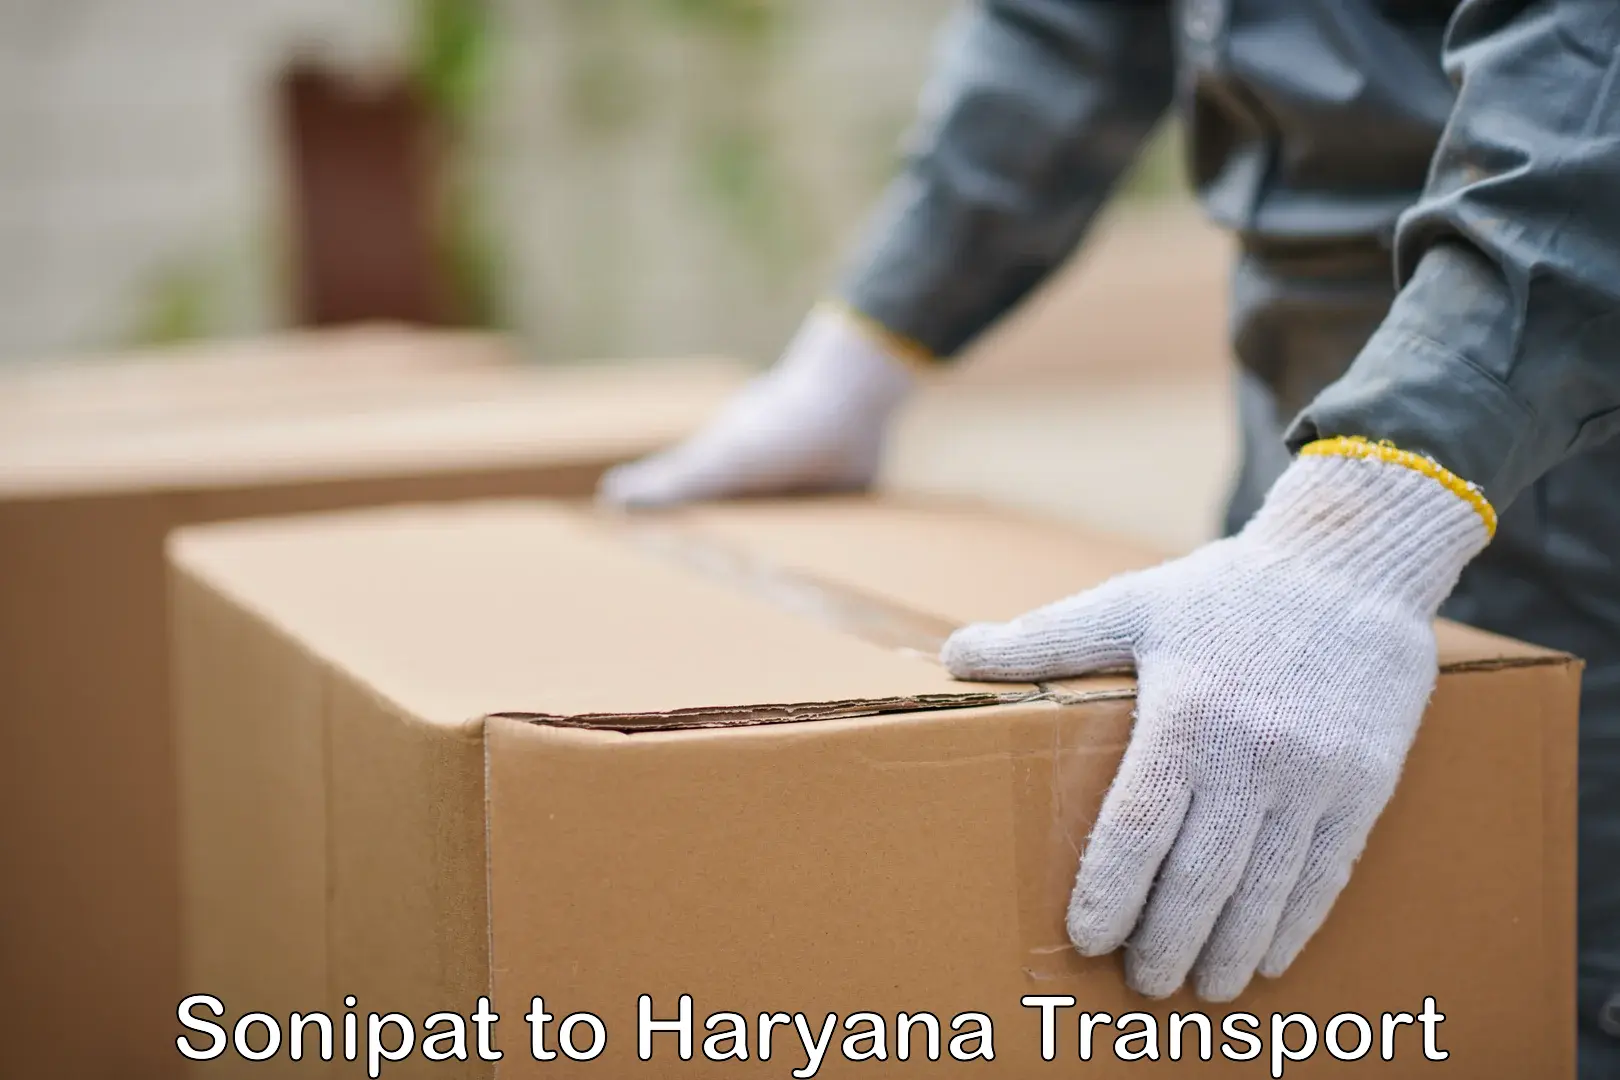 Goods delivery service Sonipat to Haryana